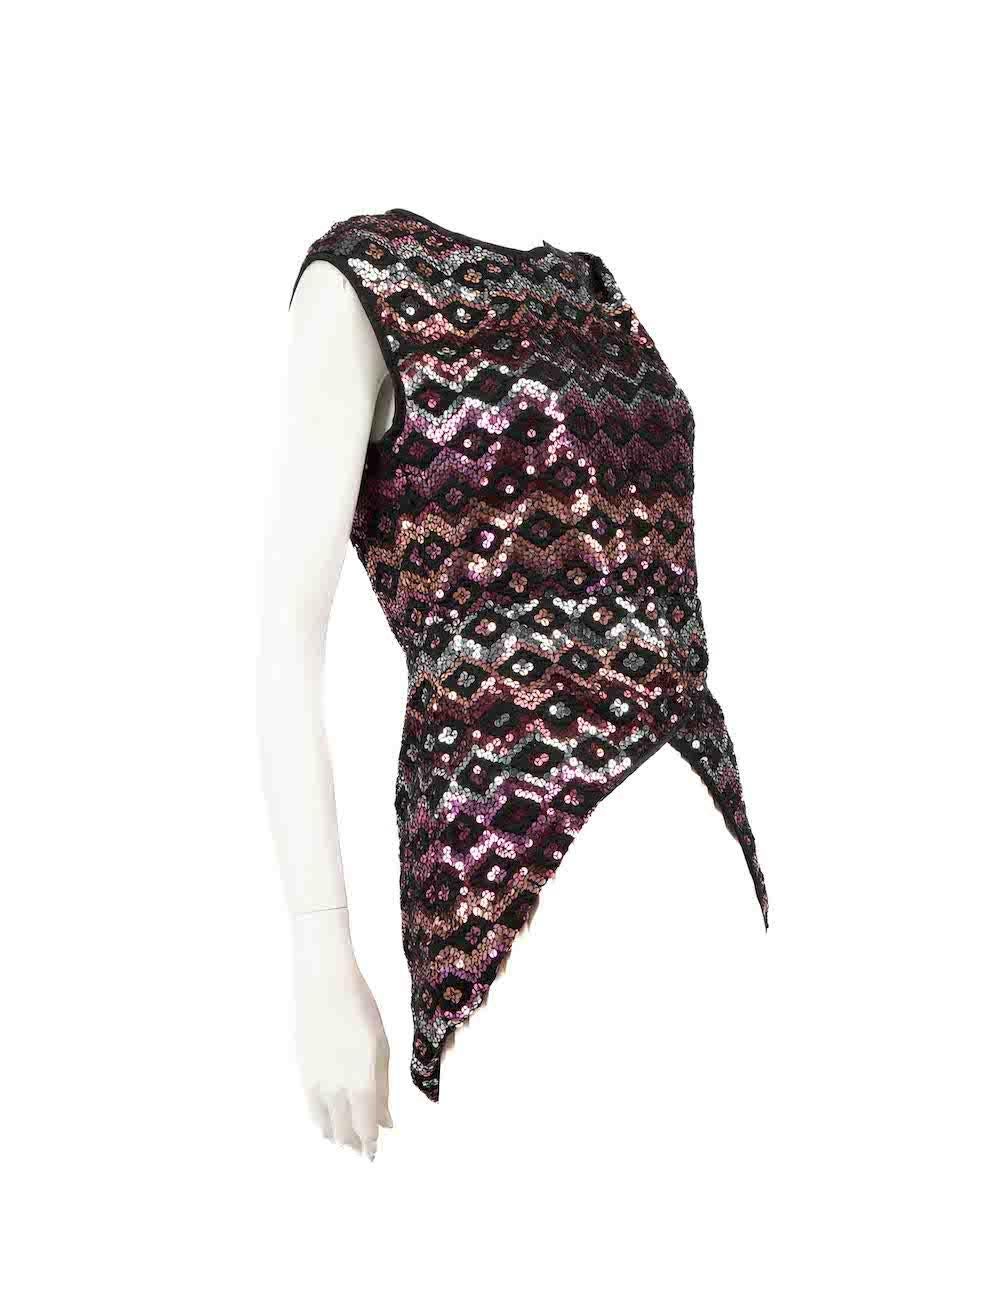 CONDITION is Very good. Minimal wear to top is evident. Minimal wear to sequins near side zipper where some are missing on this used Dries Van Norten designer resale item.
 
 
 
 Details
 
 
 Multicolour- Black, pink and silver
 
 Silk
 
 Sleeveless